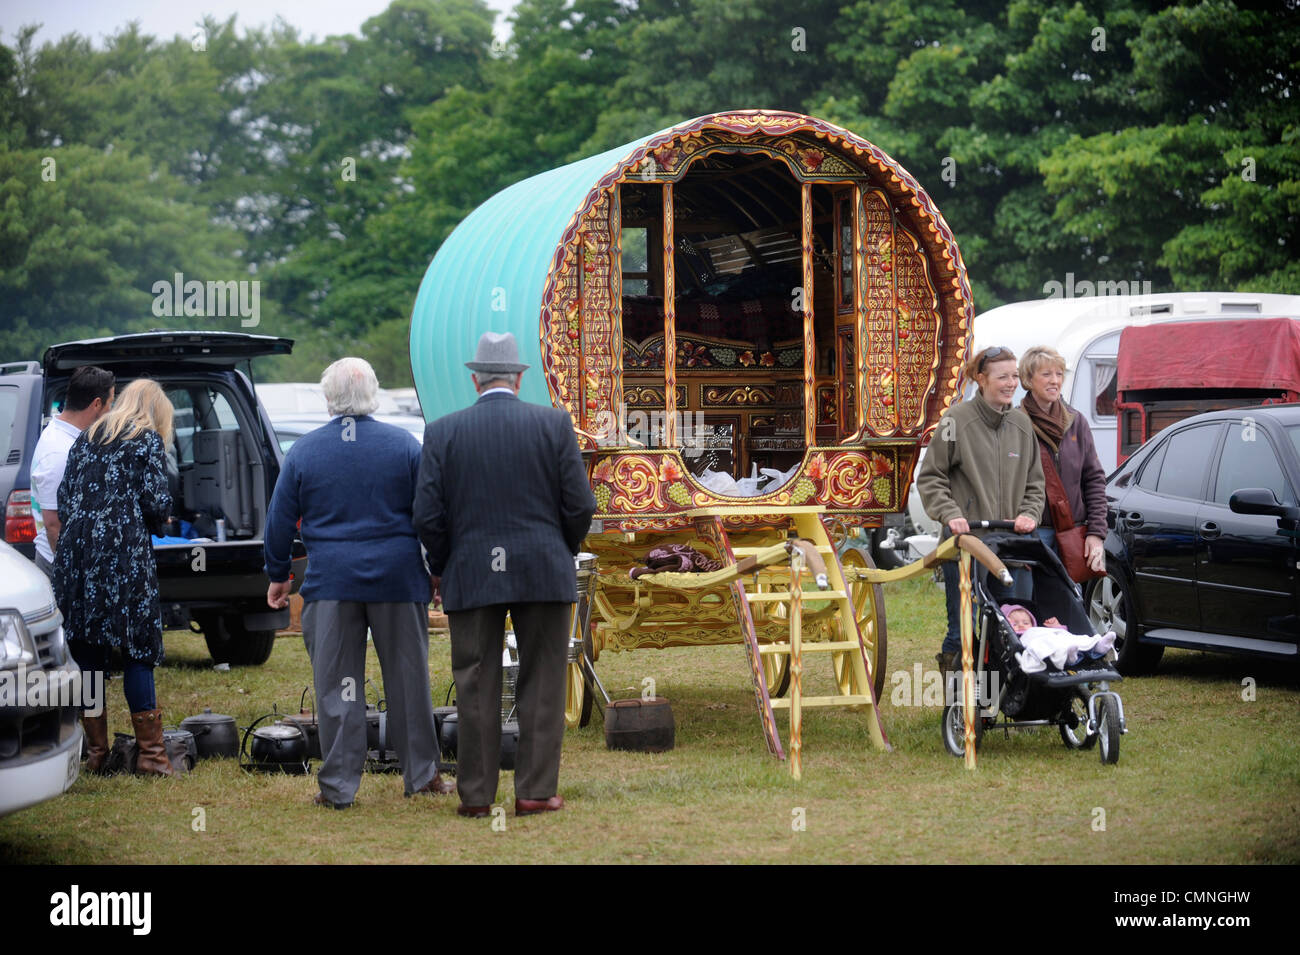 A highly decorative horse drawn caravan or Gypsy wagon at the Stow-on-the-Wold horse fair May 2009 UK Stock Photo